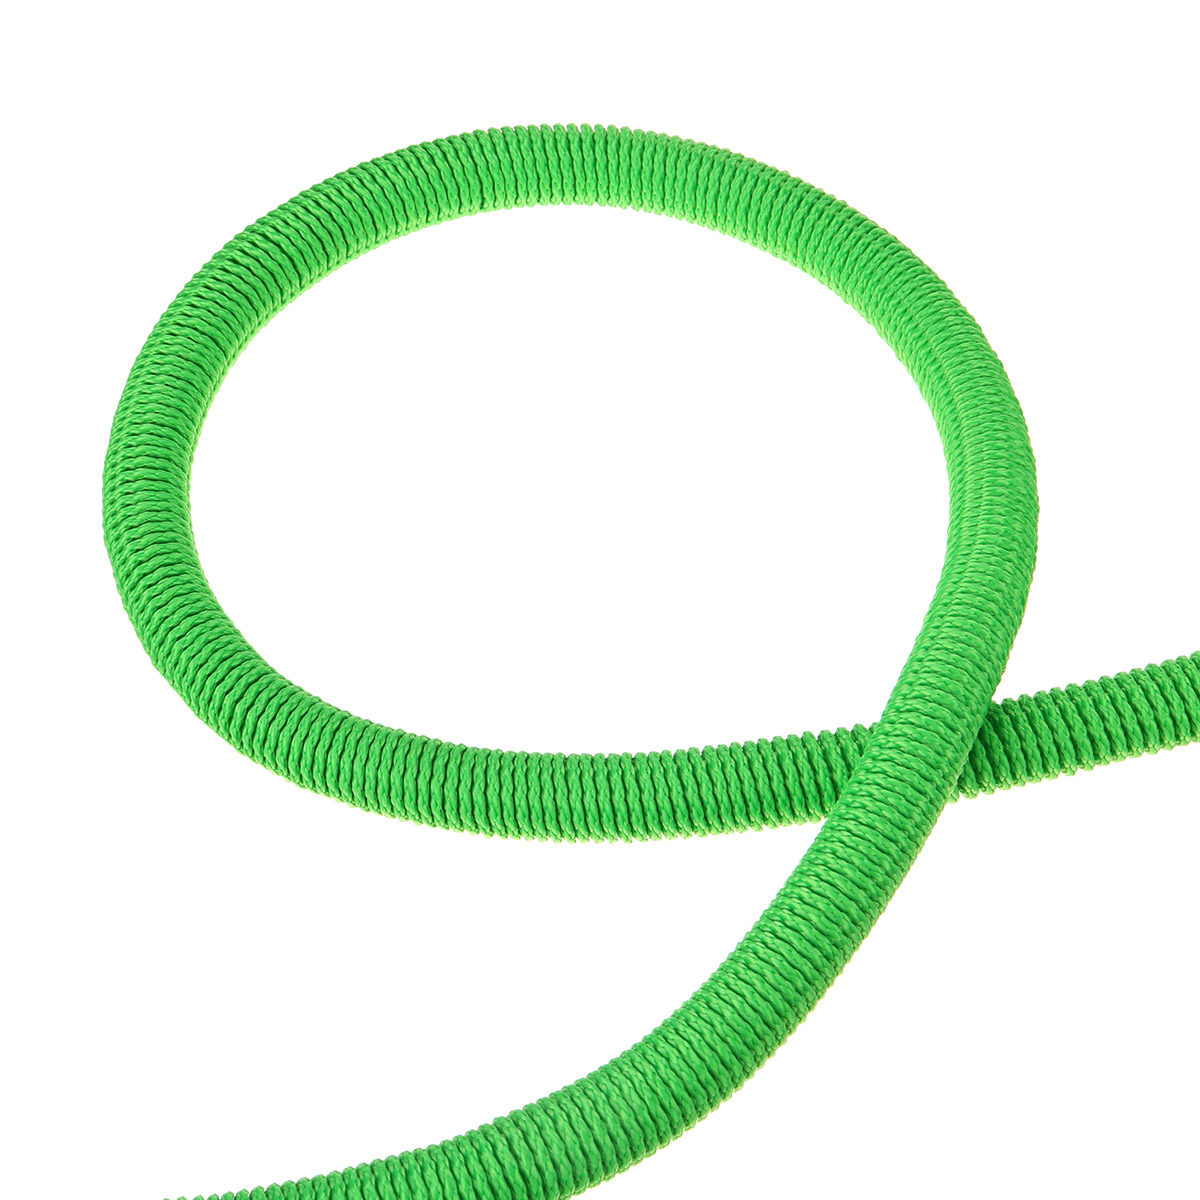 20/50/75/100FT Expandable Garden Water Hose Flexible Latex Tube US Pipe Watering